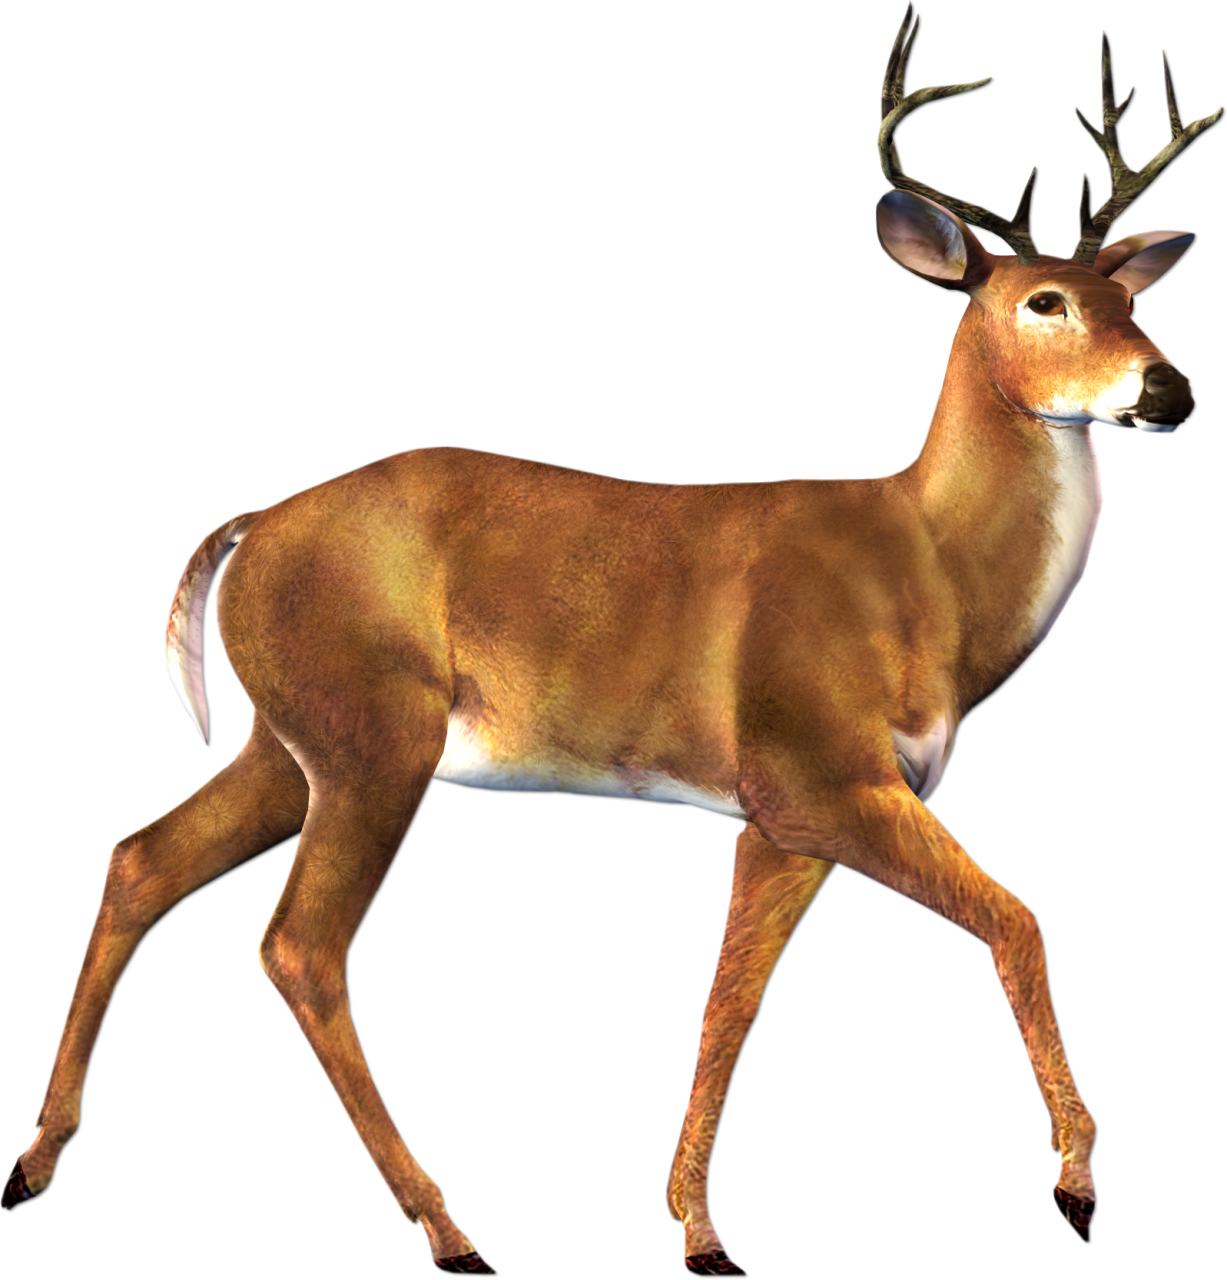 free clipart images of deer - photo #34